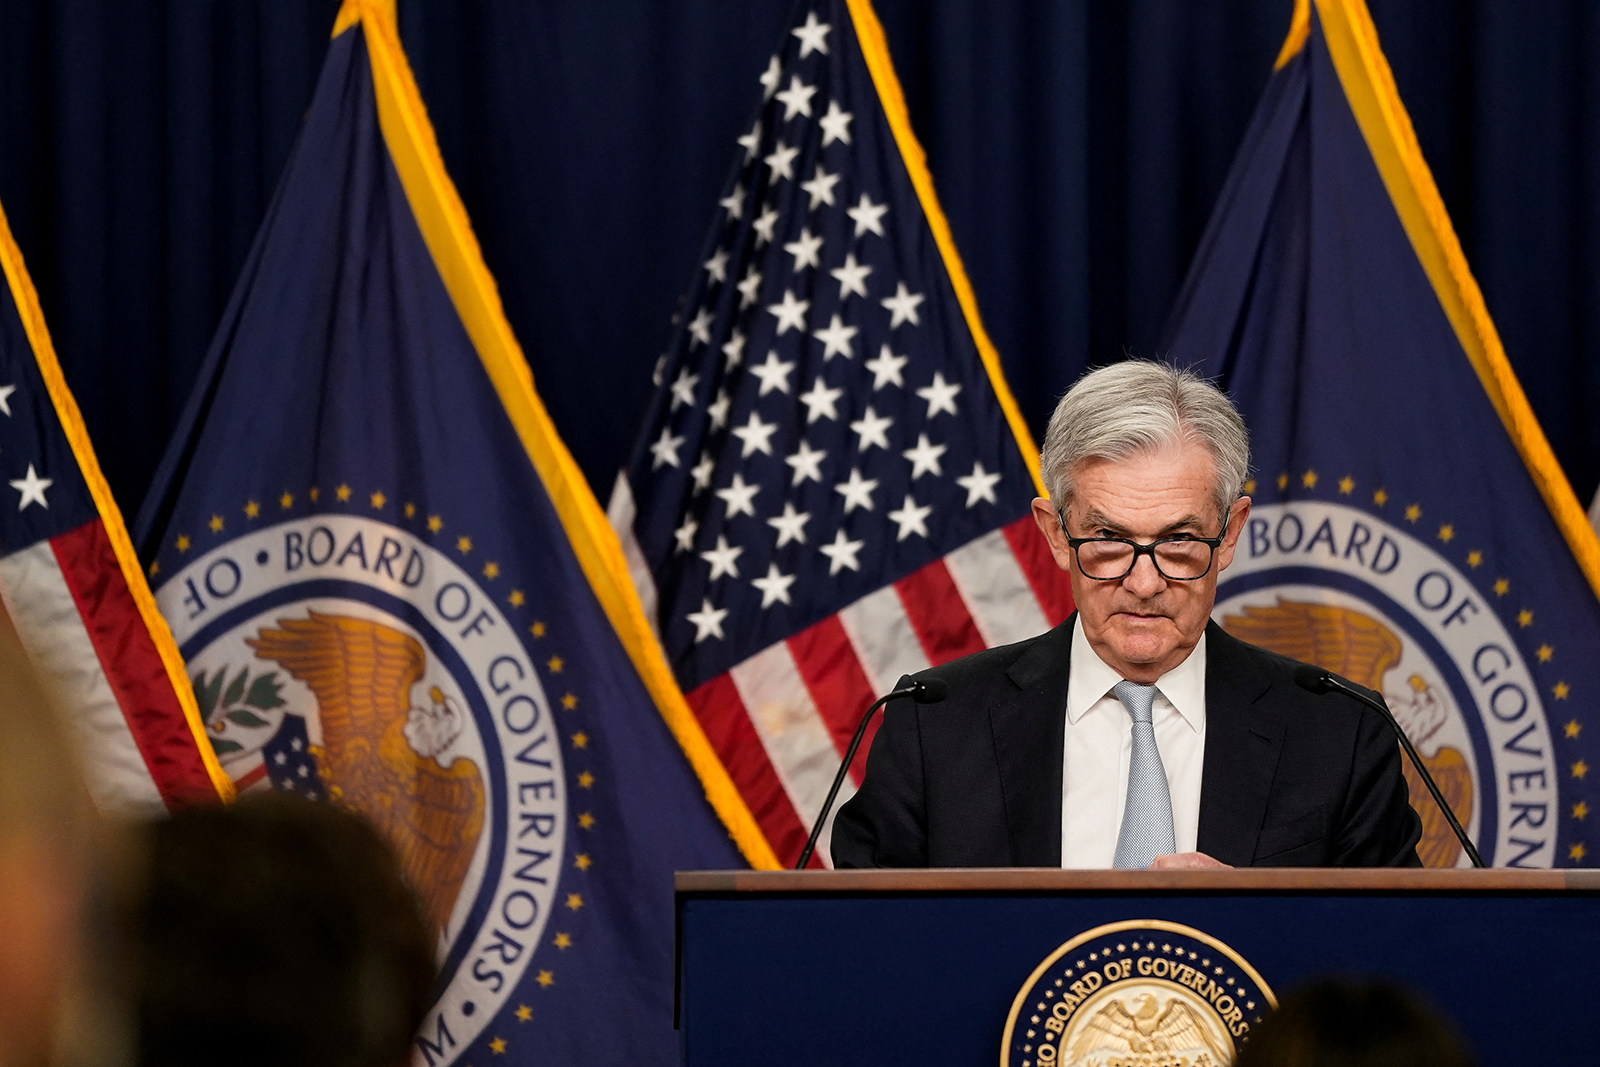 Jerome Powell during a news conference following a closed two-day meeting of the Federal Open Market Committee on interest rate policy in Washington on November 2.